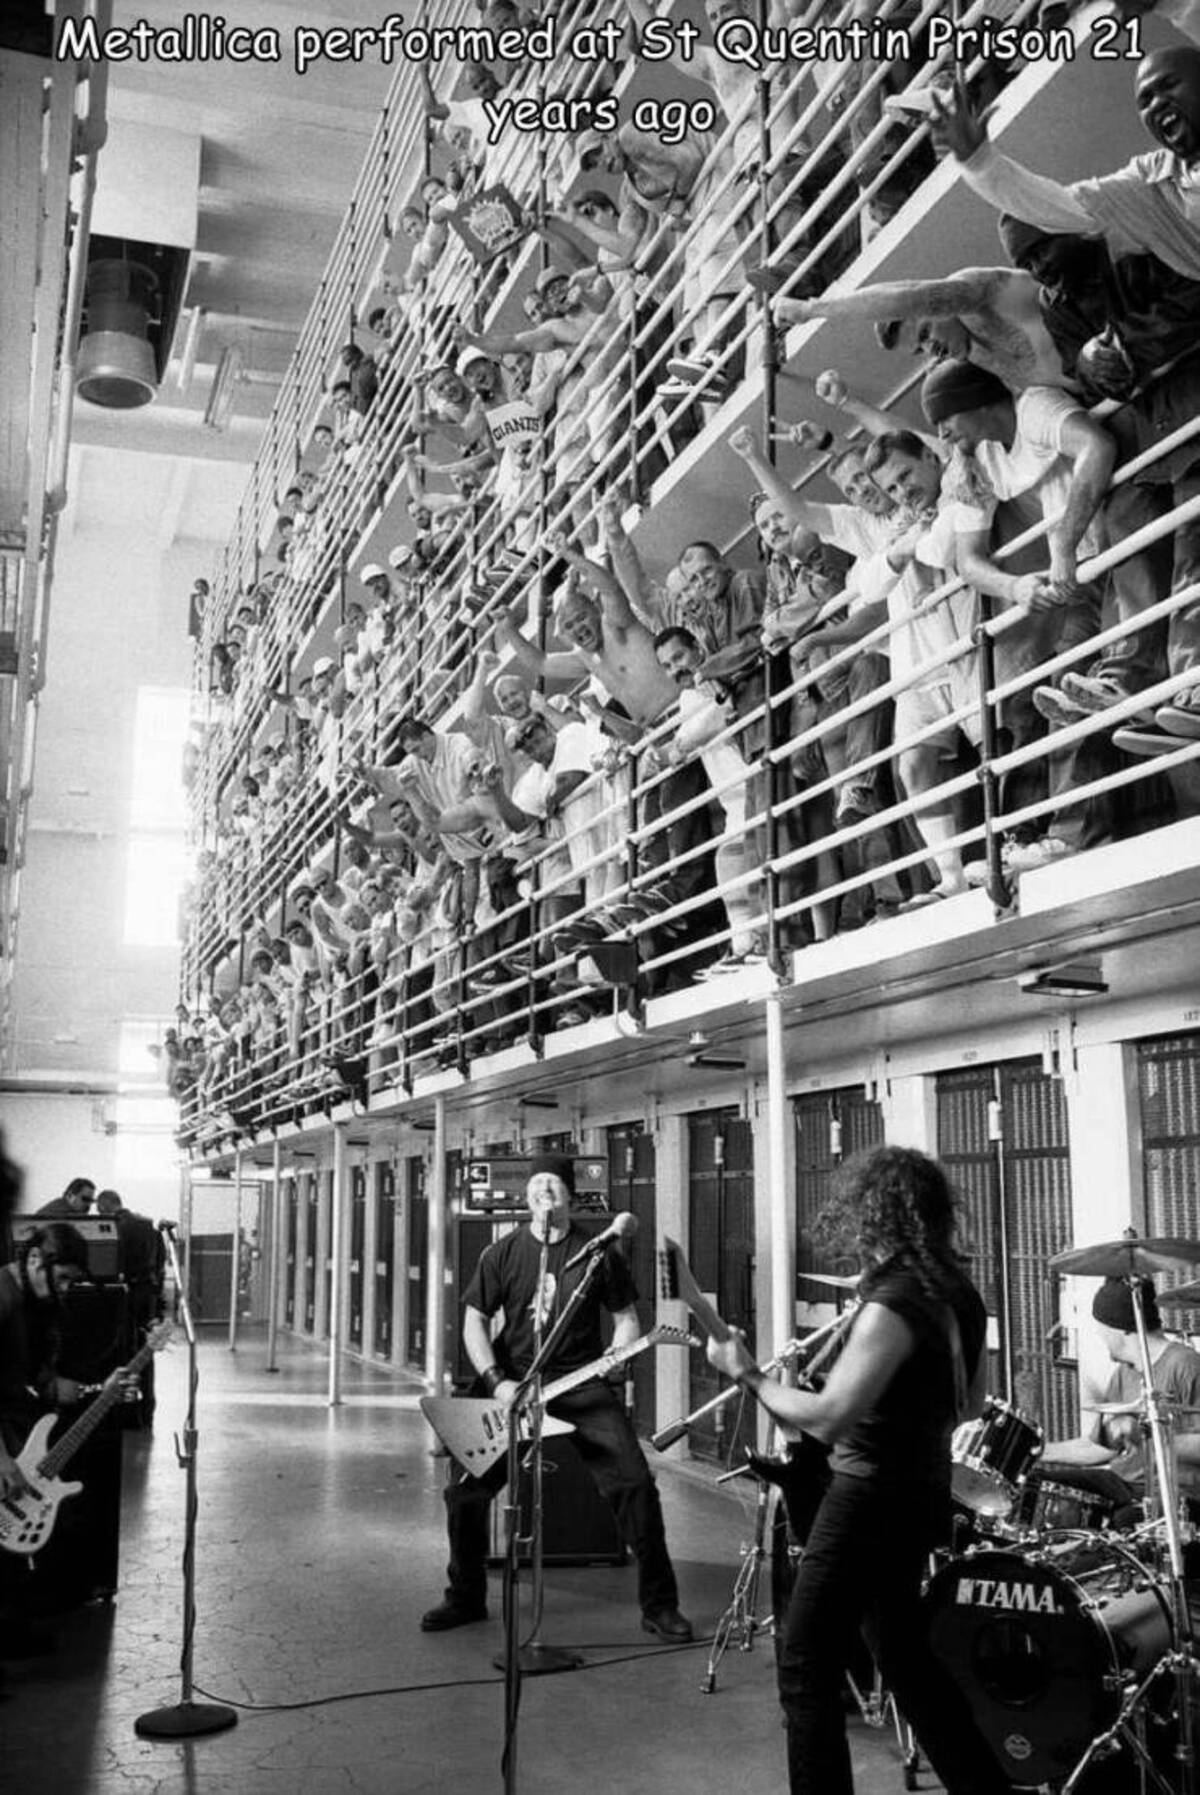 metallica playing in prison - Metallica performed at St Quentin Prison 21 years ago Clants Tama 187